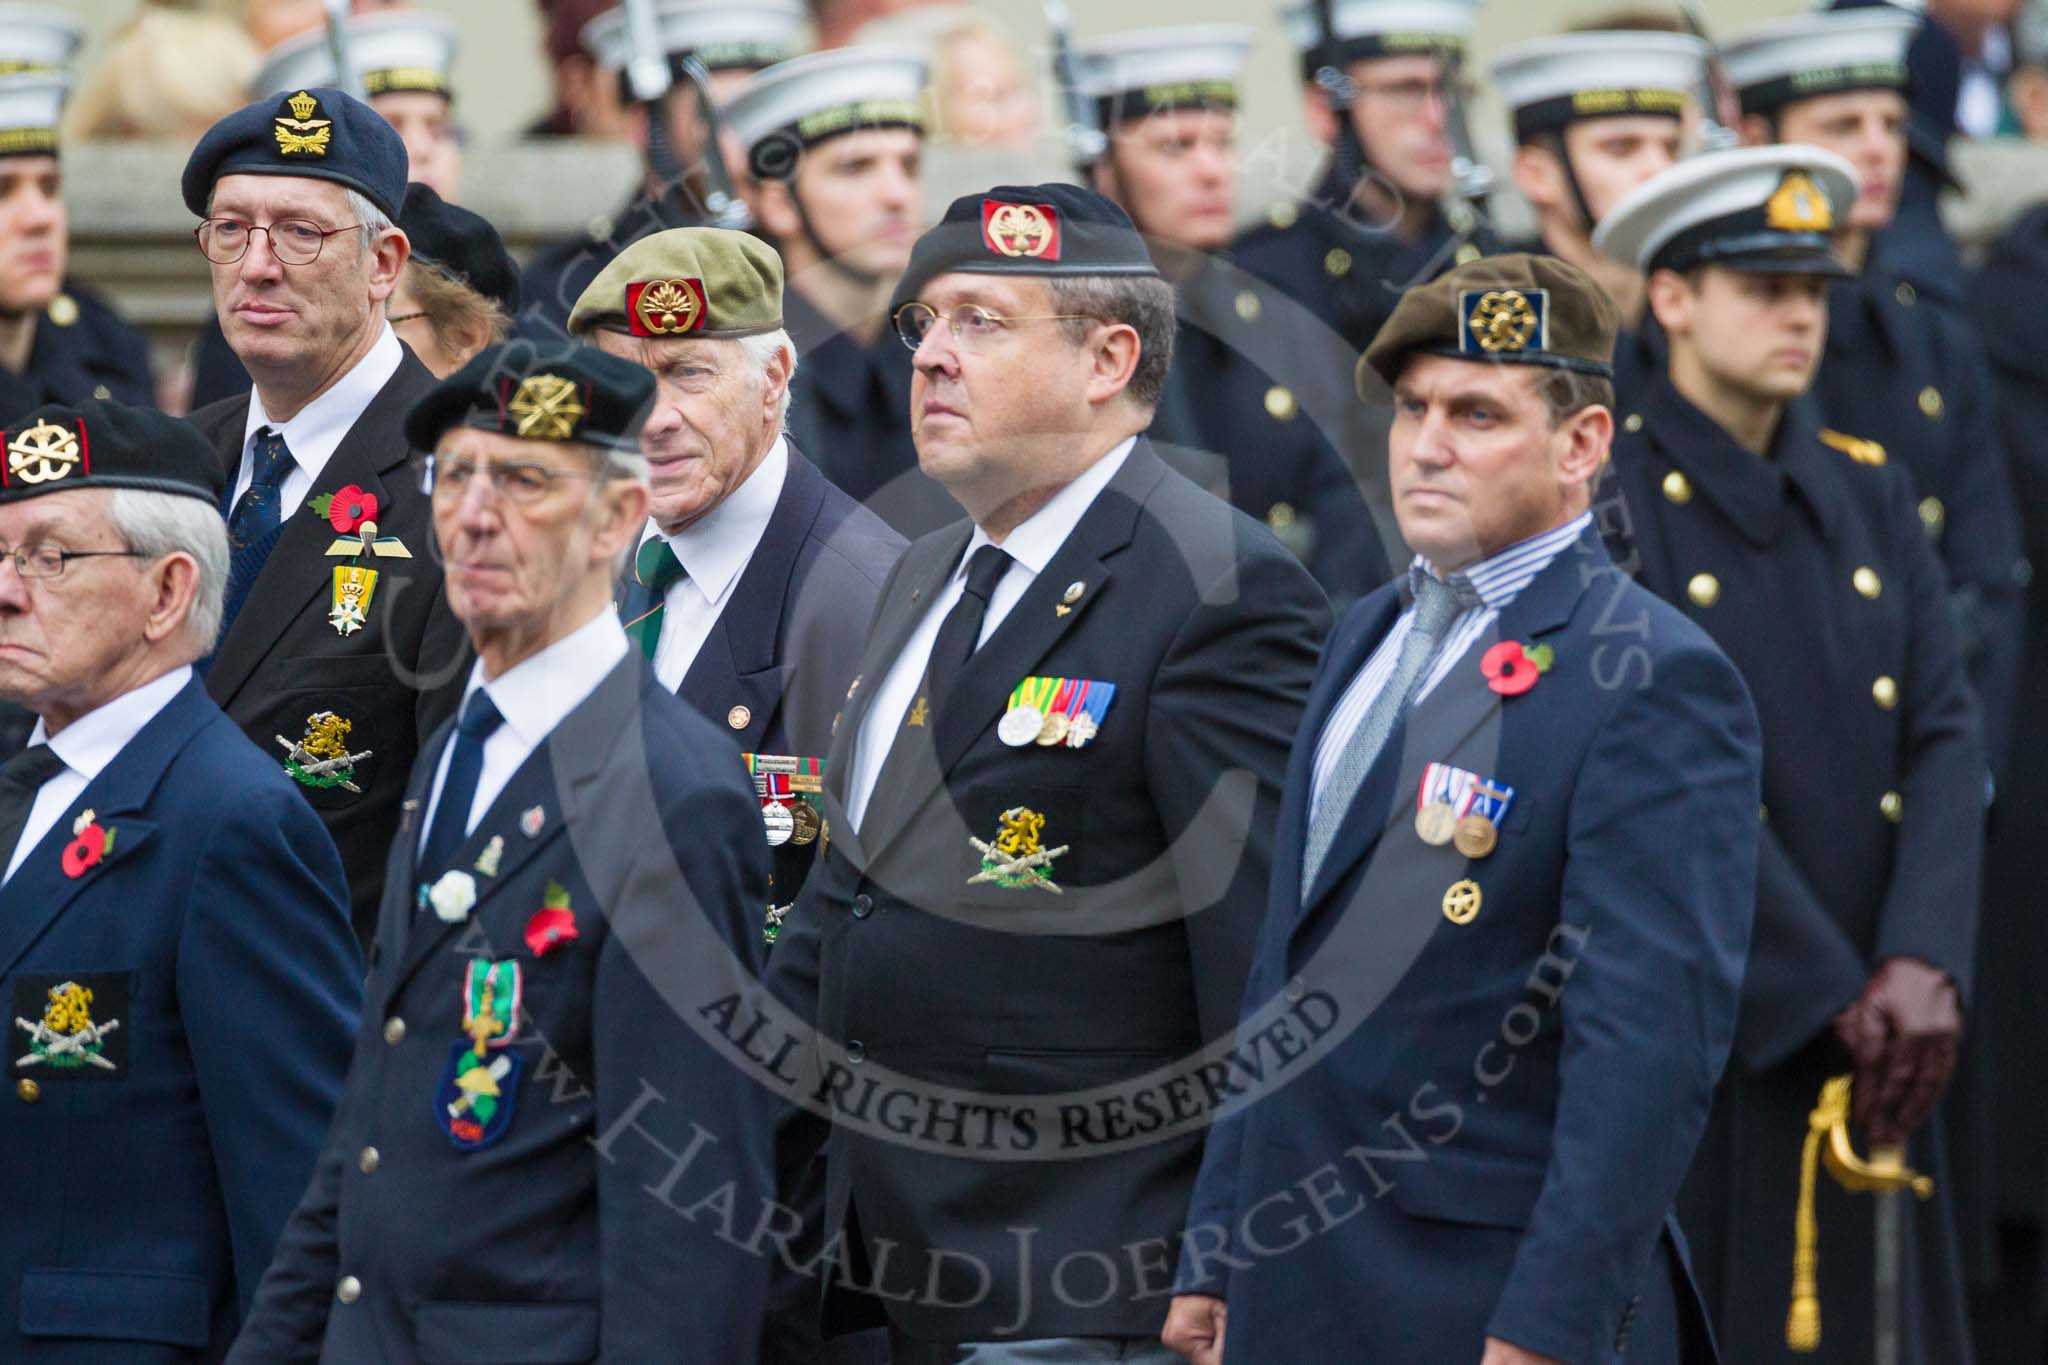 Remembrance Sunday at the Cenotaph 2015: Group D20, Bond Van Wapenbroeders.
Cenotaph, Whitehall, London SW1,
London,
Greater London,
United Kingdom,
on 08 November 2015 at 11:55, image #715